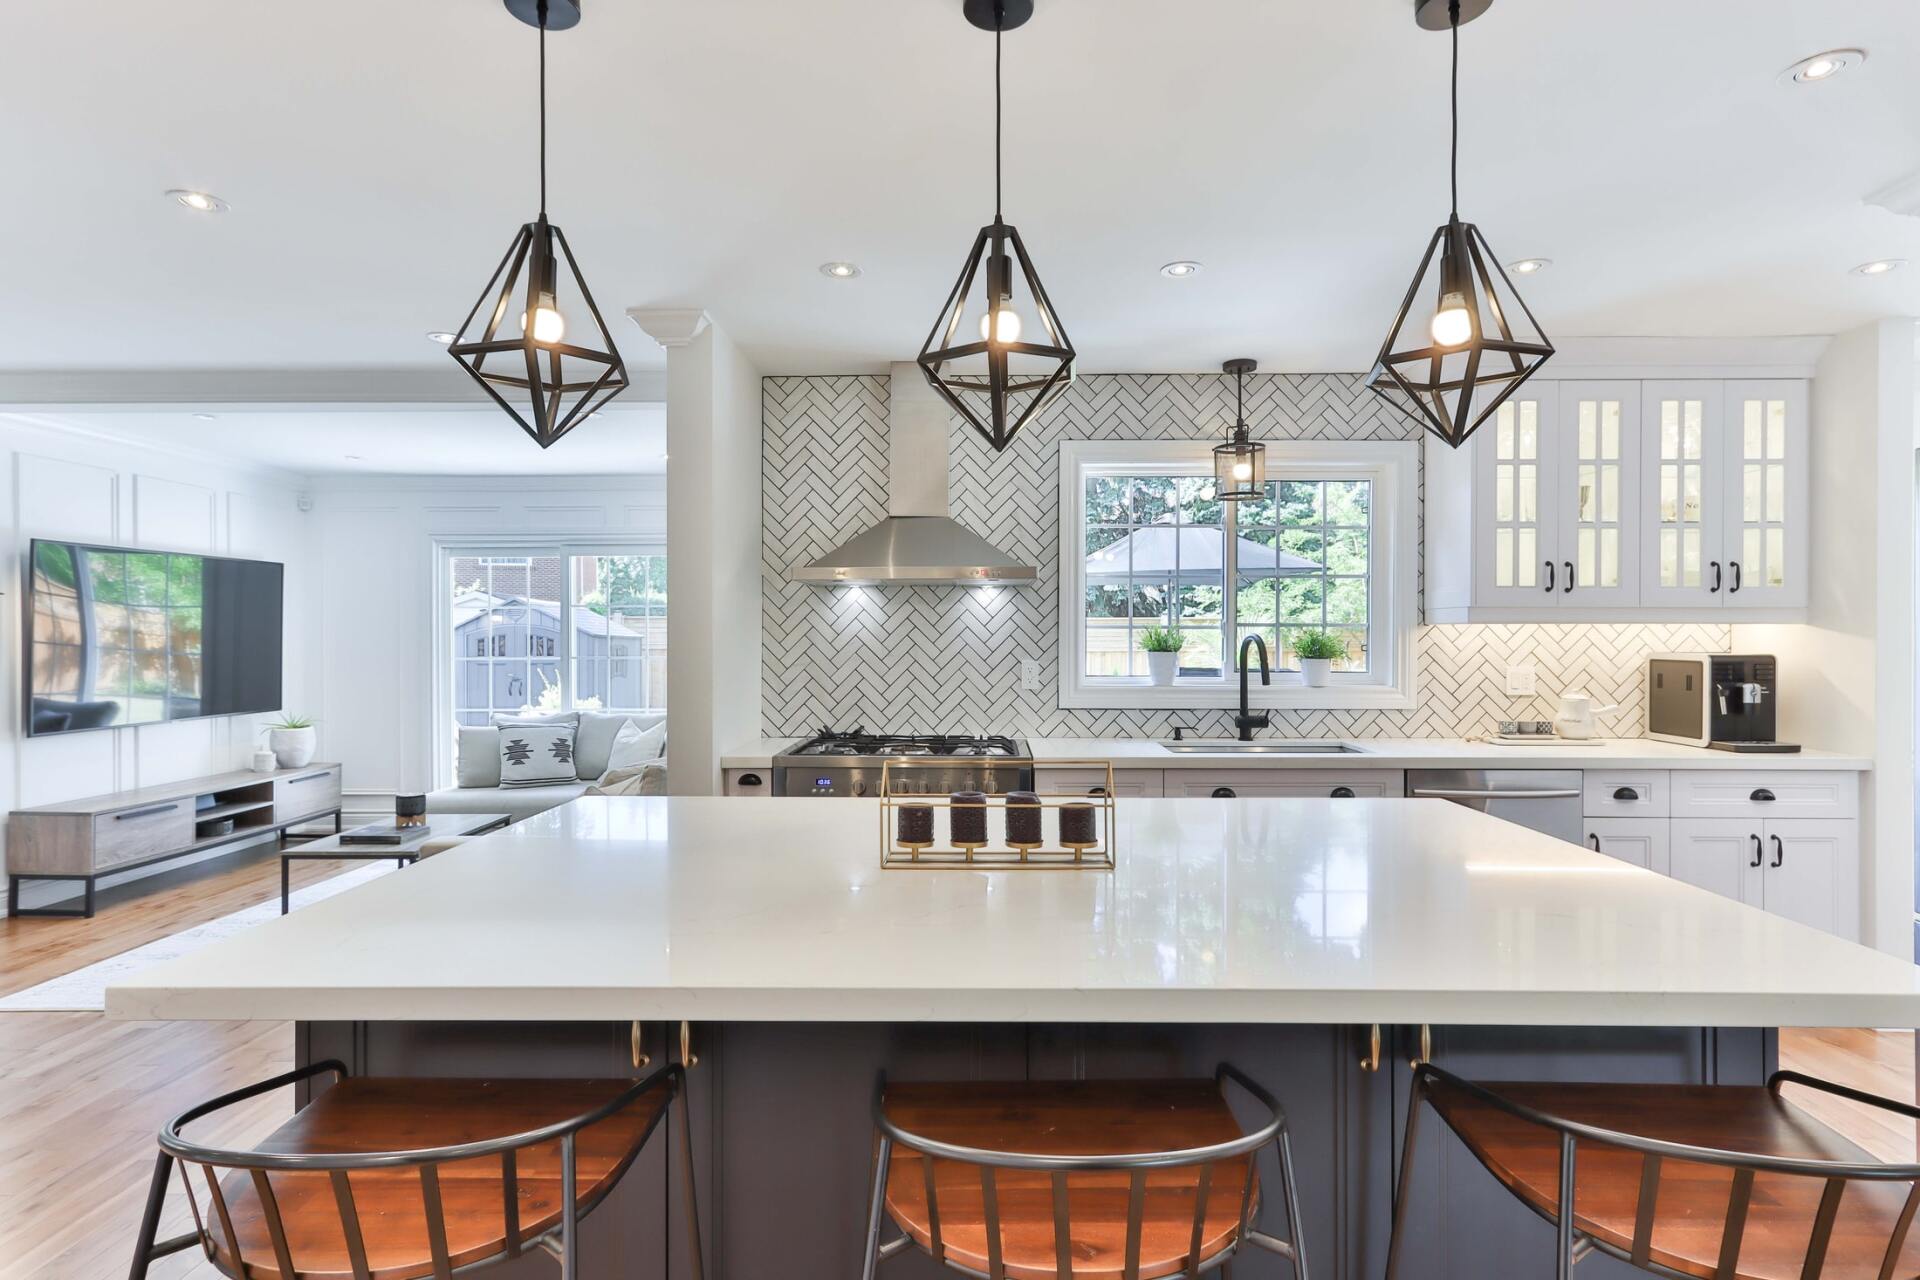 update your light fixtures in your kitchen to give a newer look